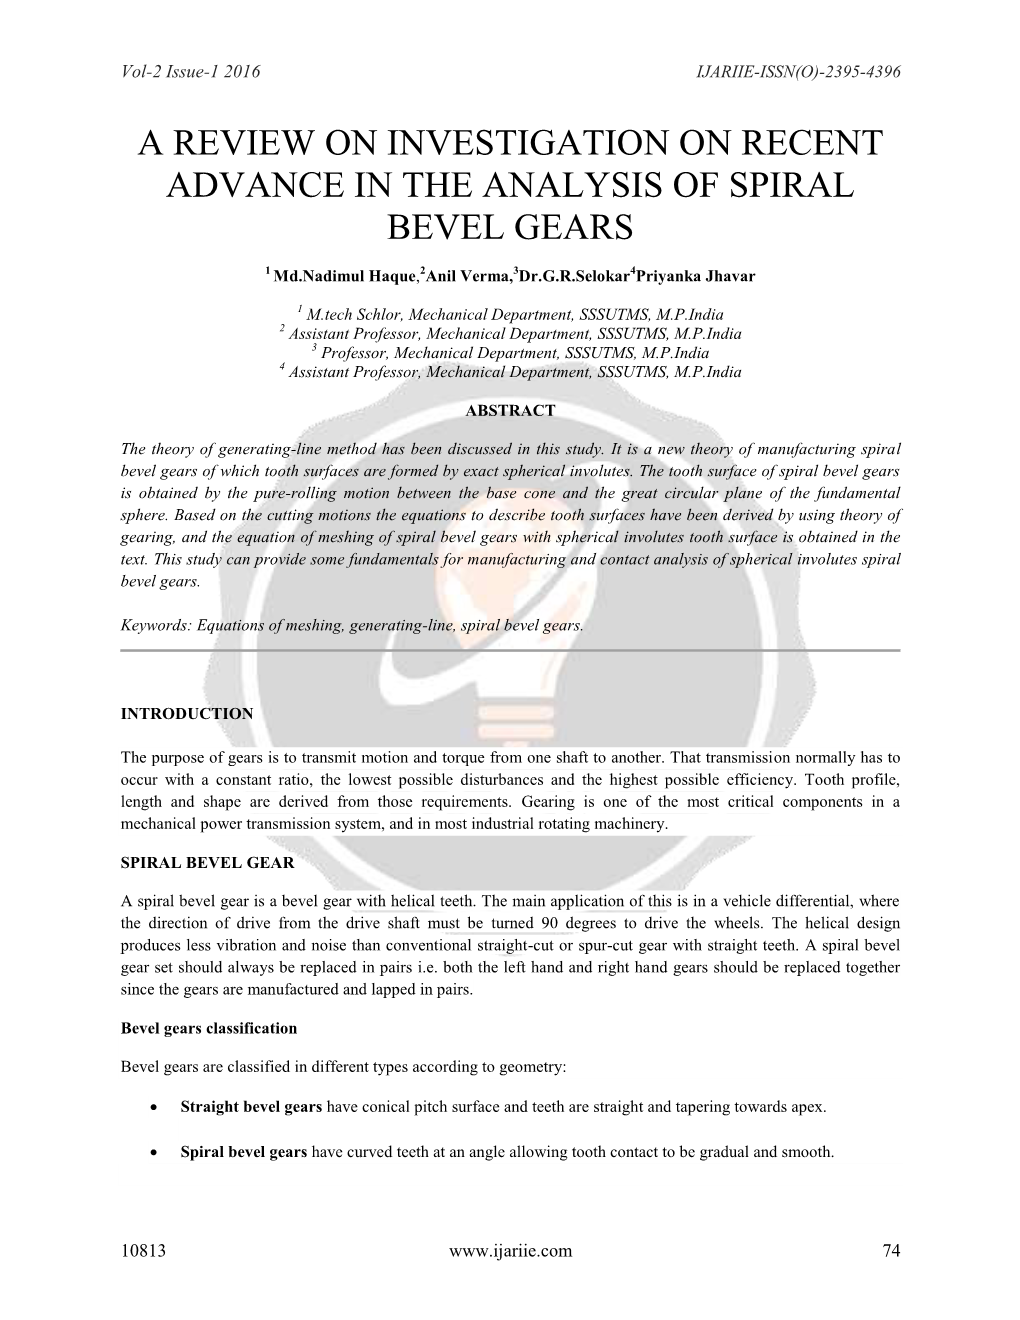 A Review on Investigation on Recent Advance in the Analysis of Spiral Bevel Gears